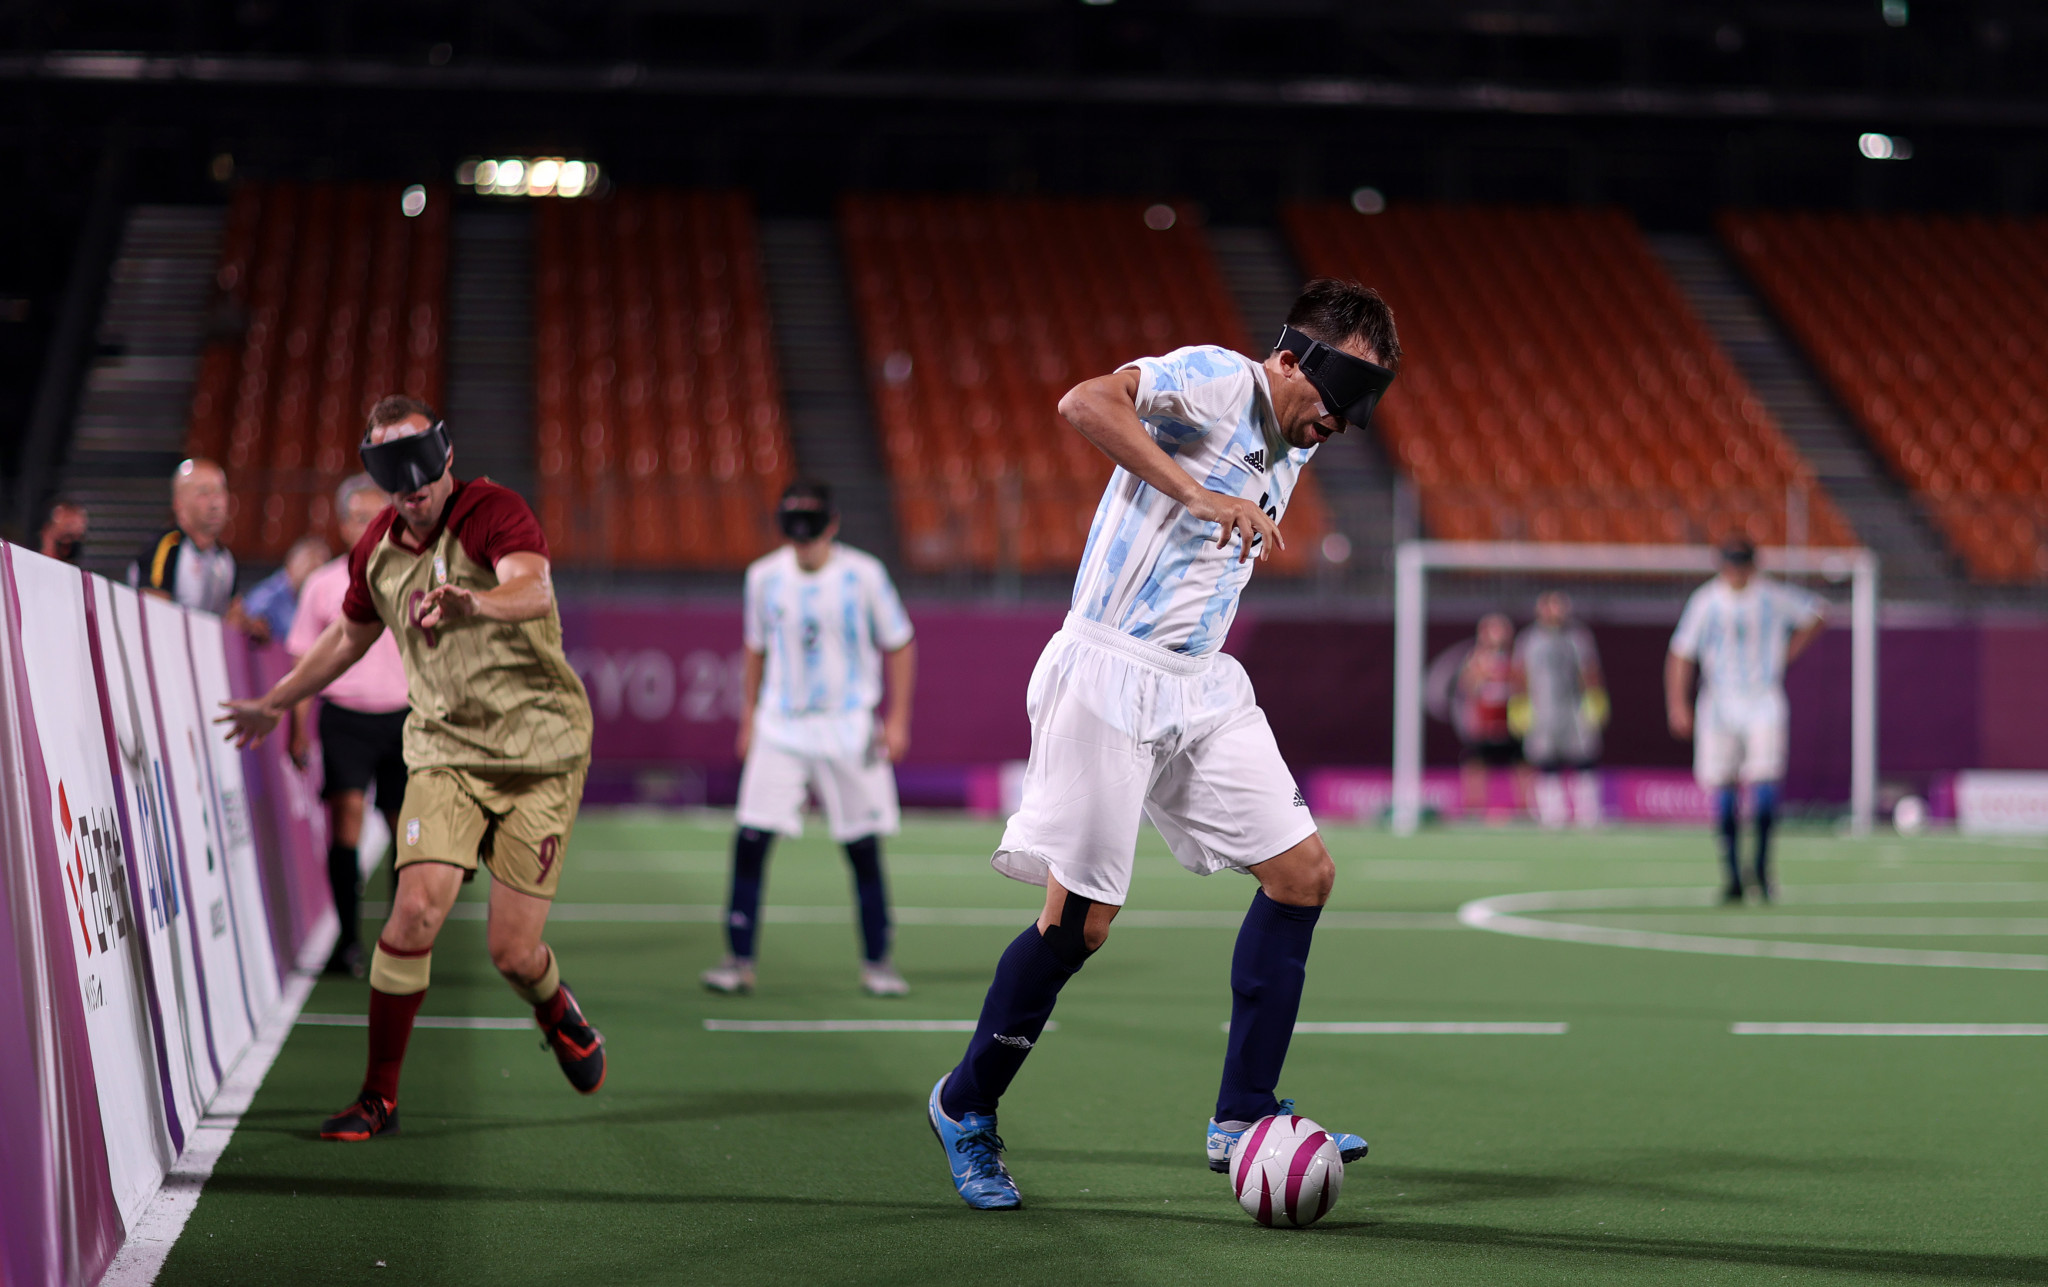 India, Guatemala and Argentina picked to stage IBSA Blind Football competitions in 2022